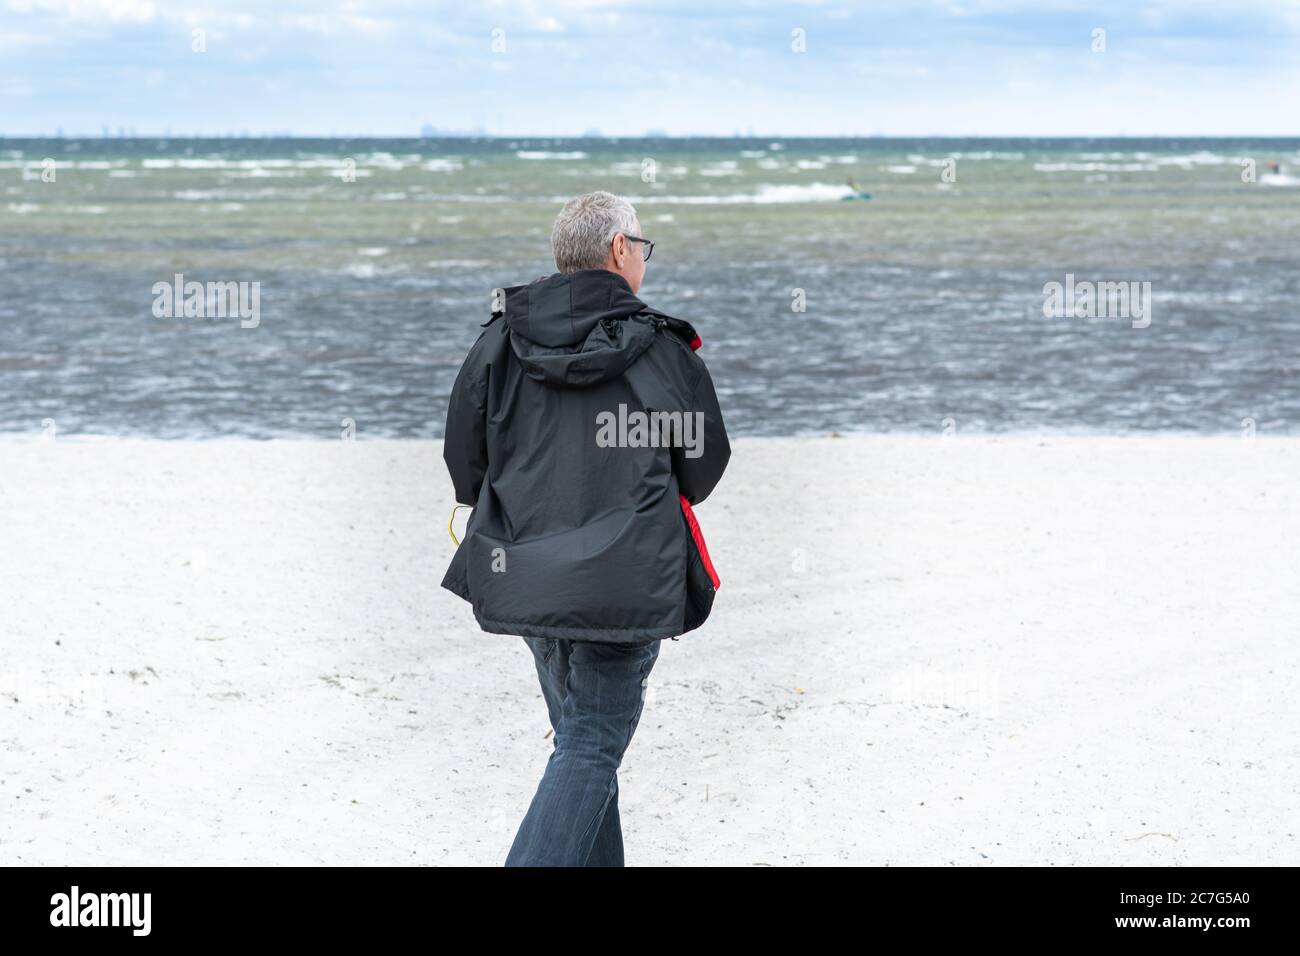 A middle-aged man, 50 plus, walks along a white beach. Outdoor activities that include social distance is safe activities during the coronavirus pandemic. Blue sky, turquoise water in the background Stock Photo